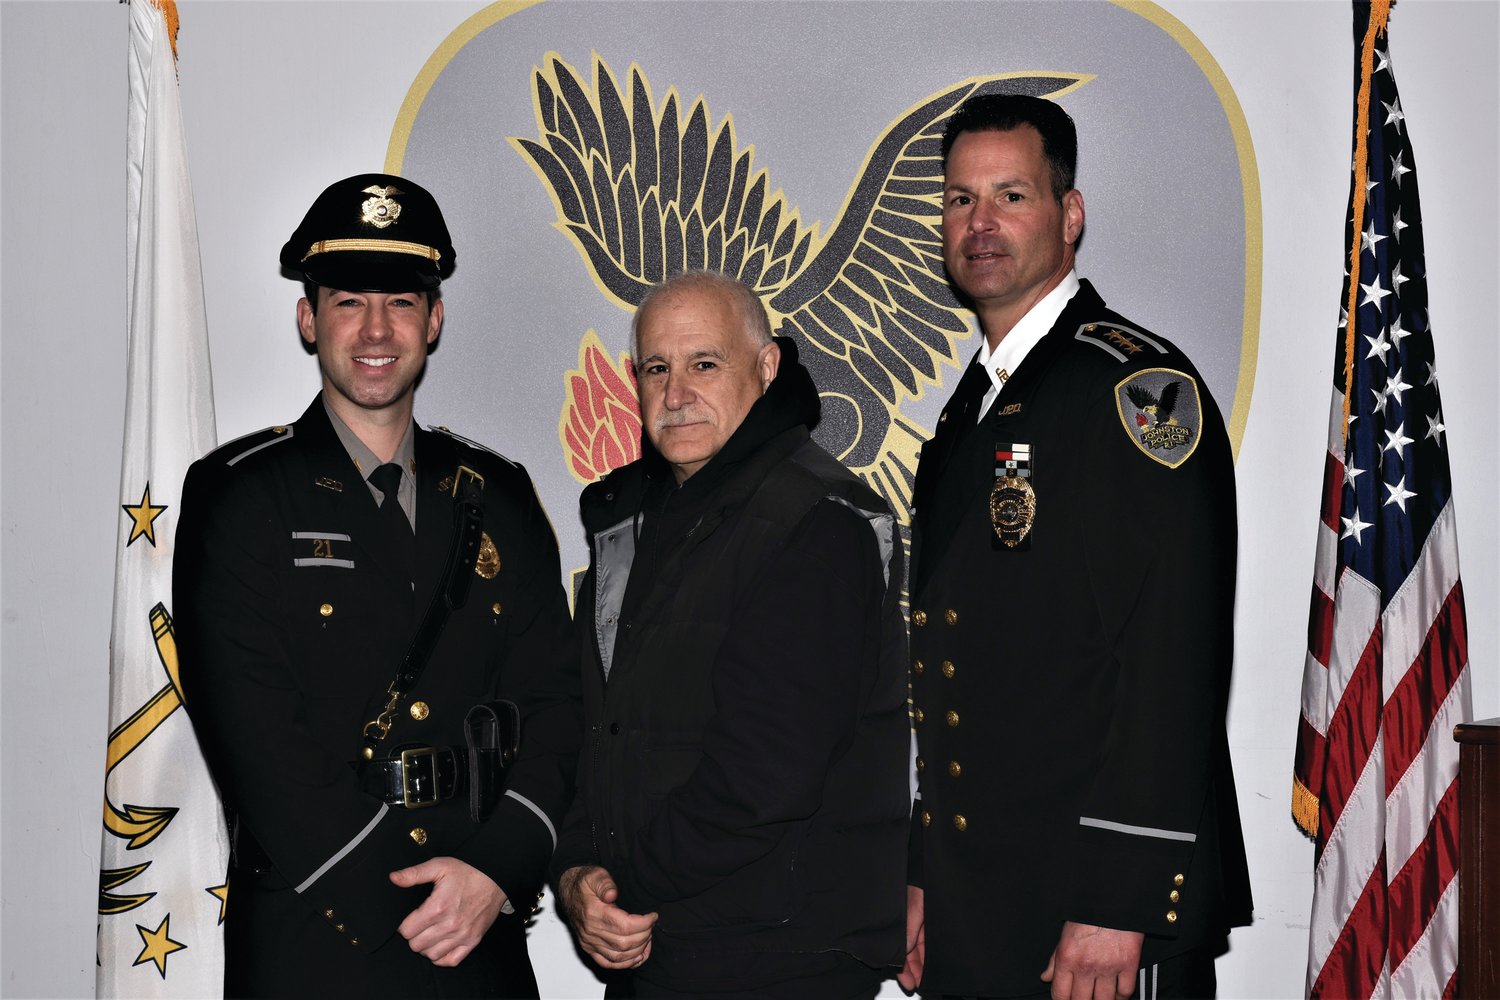 PROMOTED: Sgt. Michael Martufi is joined by Johnston Mayor Joseph Polisena and Chief Joseph Razza during his promotional ceremony held at police department headquarters.